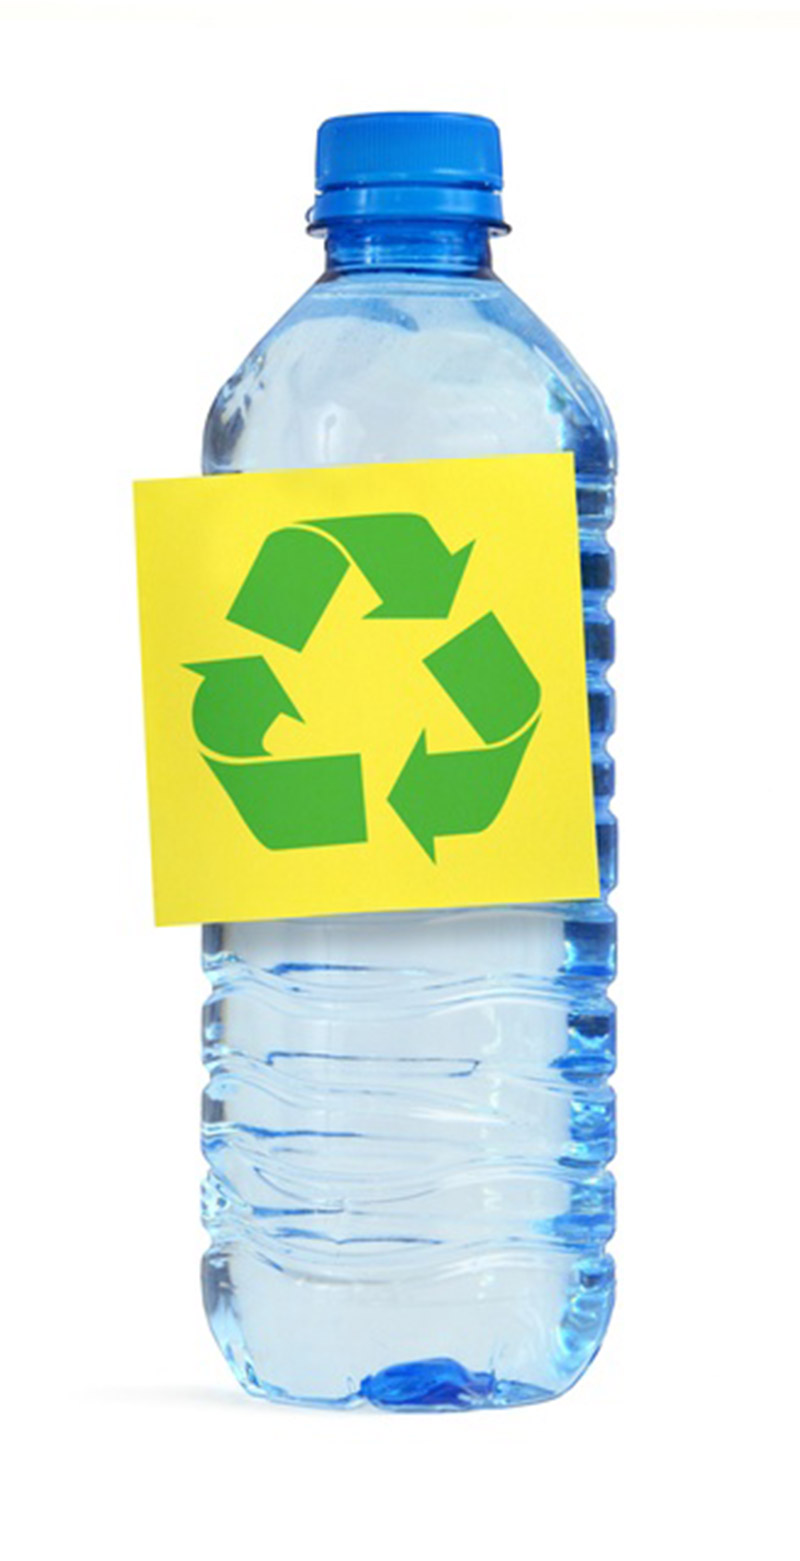 Main image for Deposit scheme for plastic bottles and cans